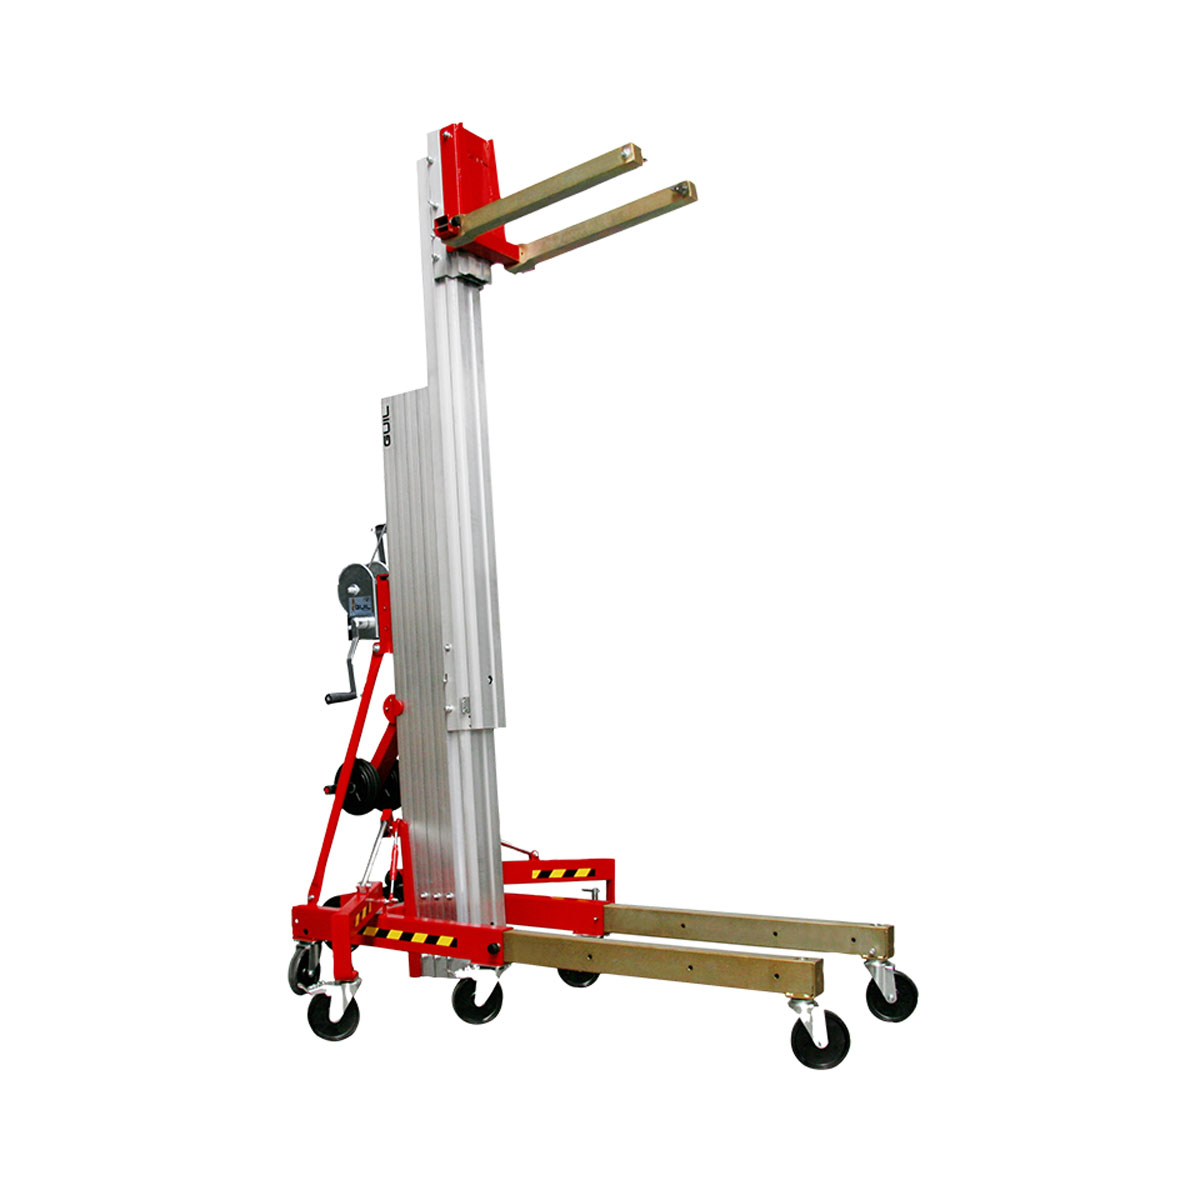 GUIL Lifter Model Image